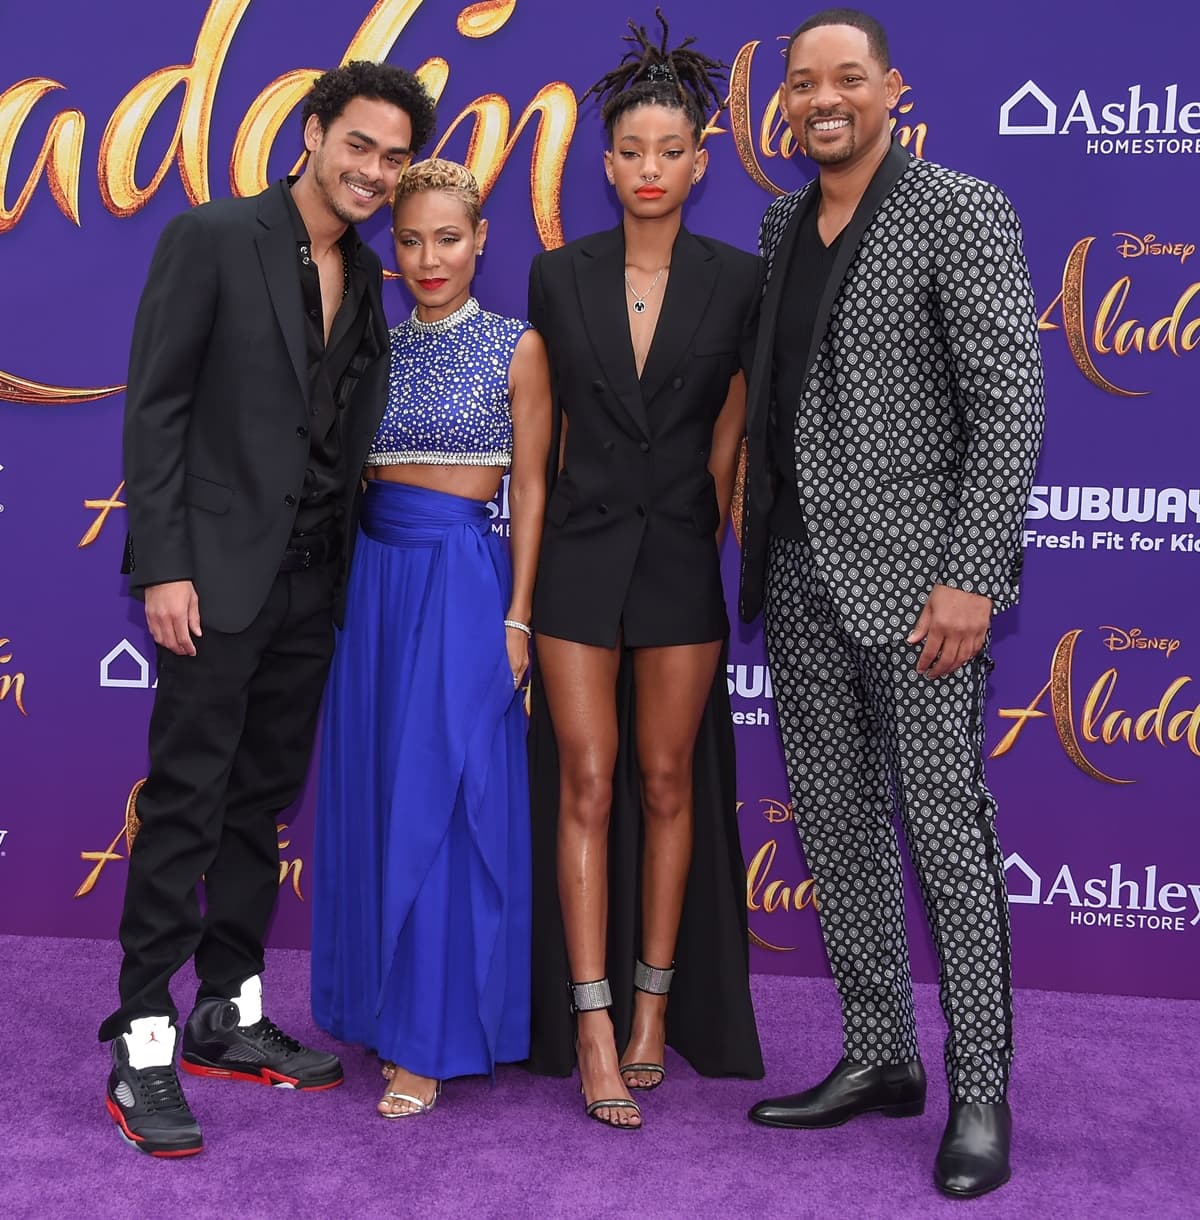 Jada Pinkett Smith is shorter than the average US woman and looks petite next to Trey Smith, Willow Smith, and Will Smith